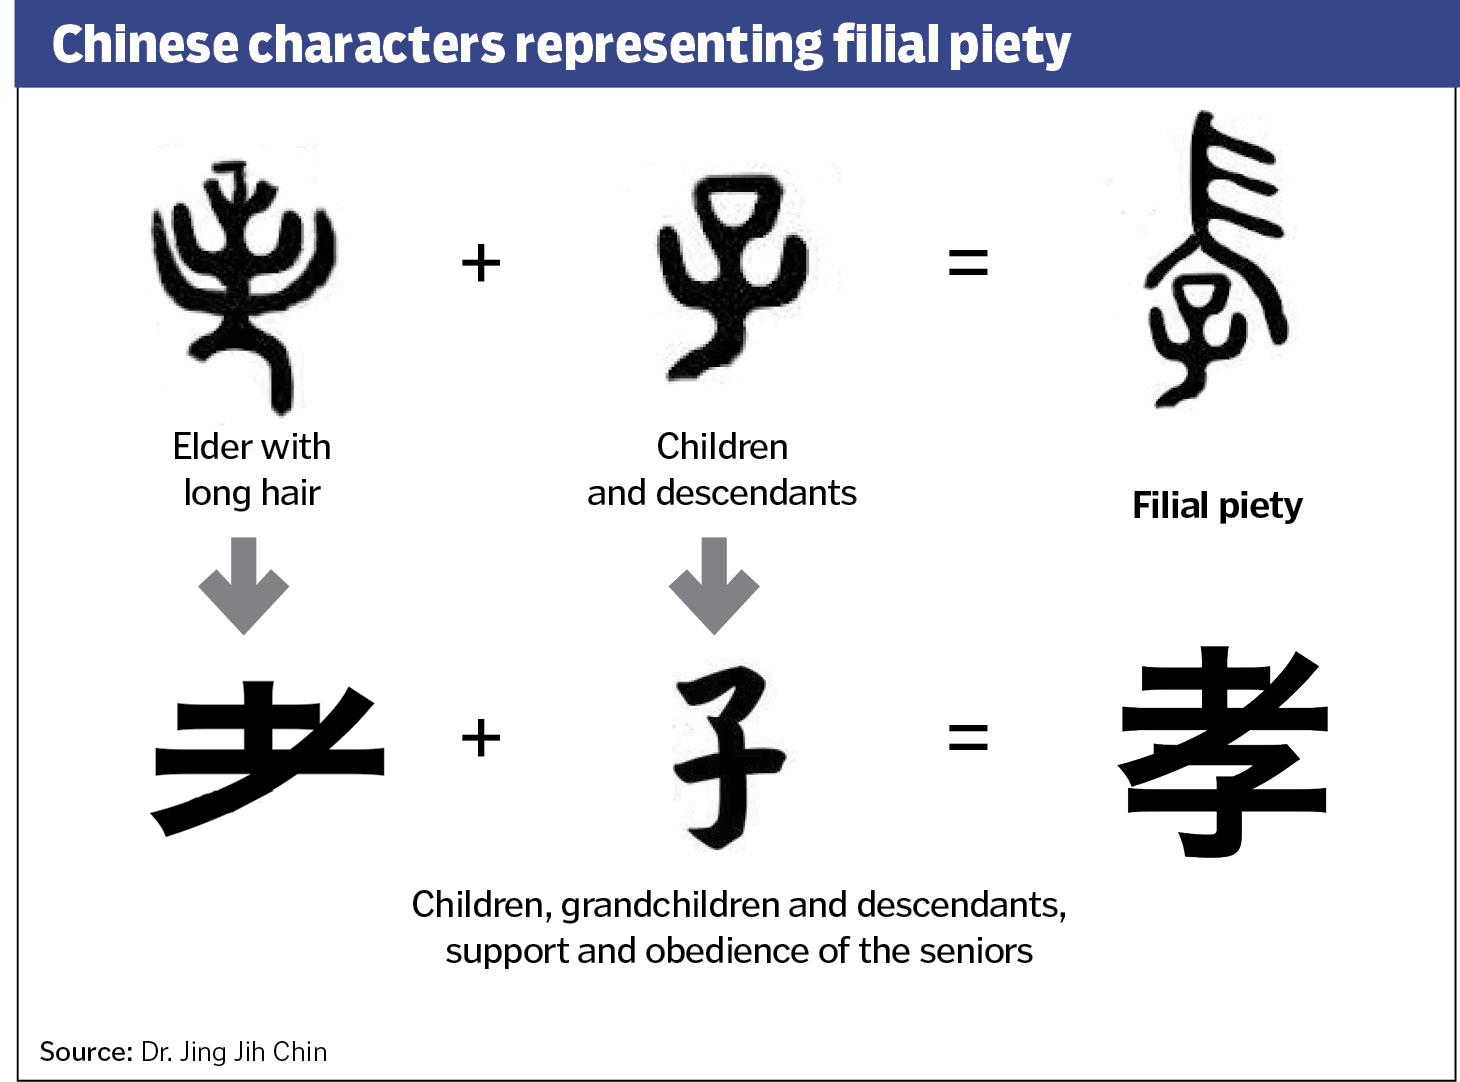 Chinese characters representing fillial piety